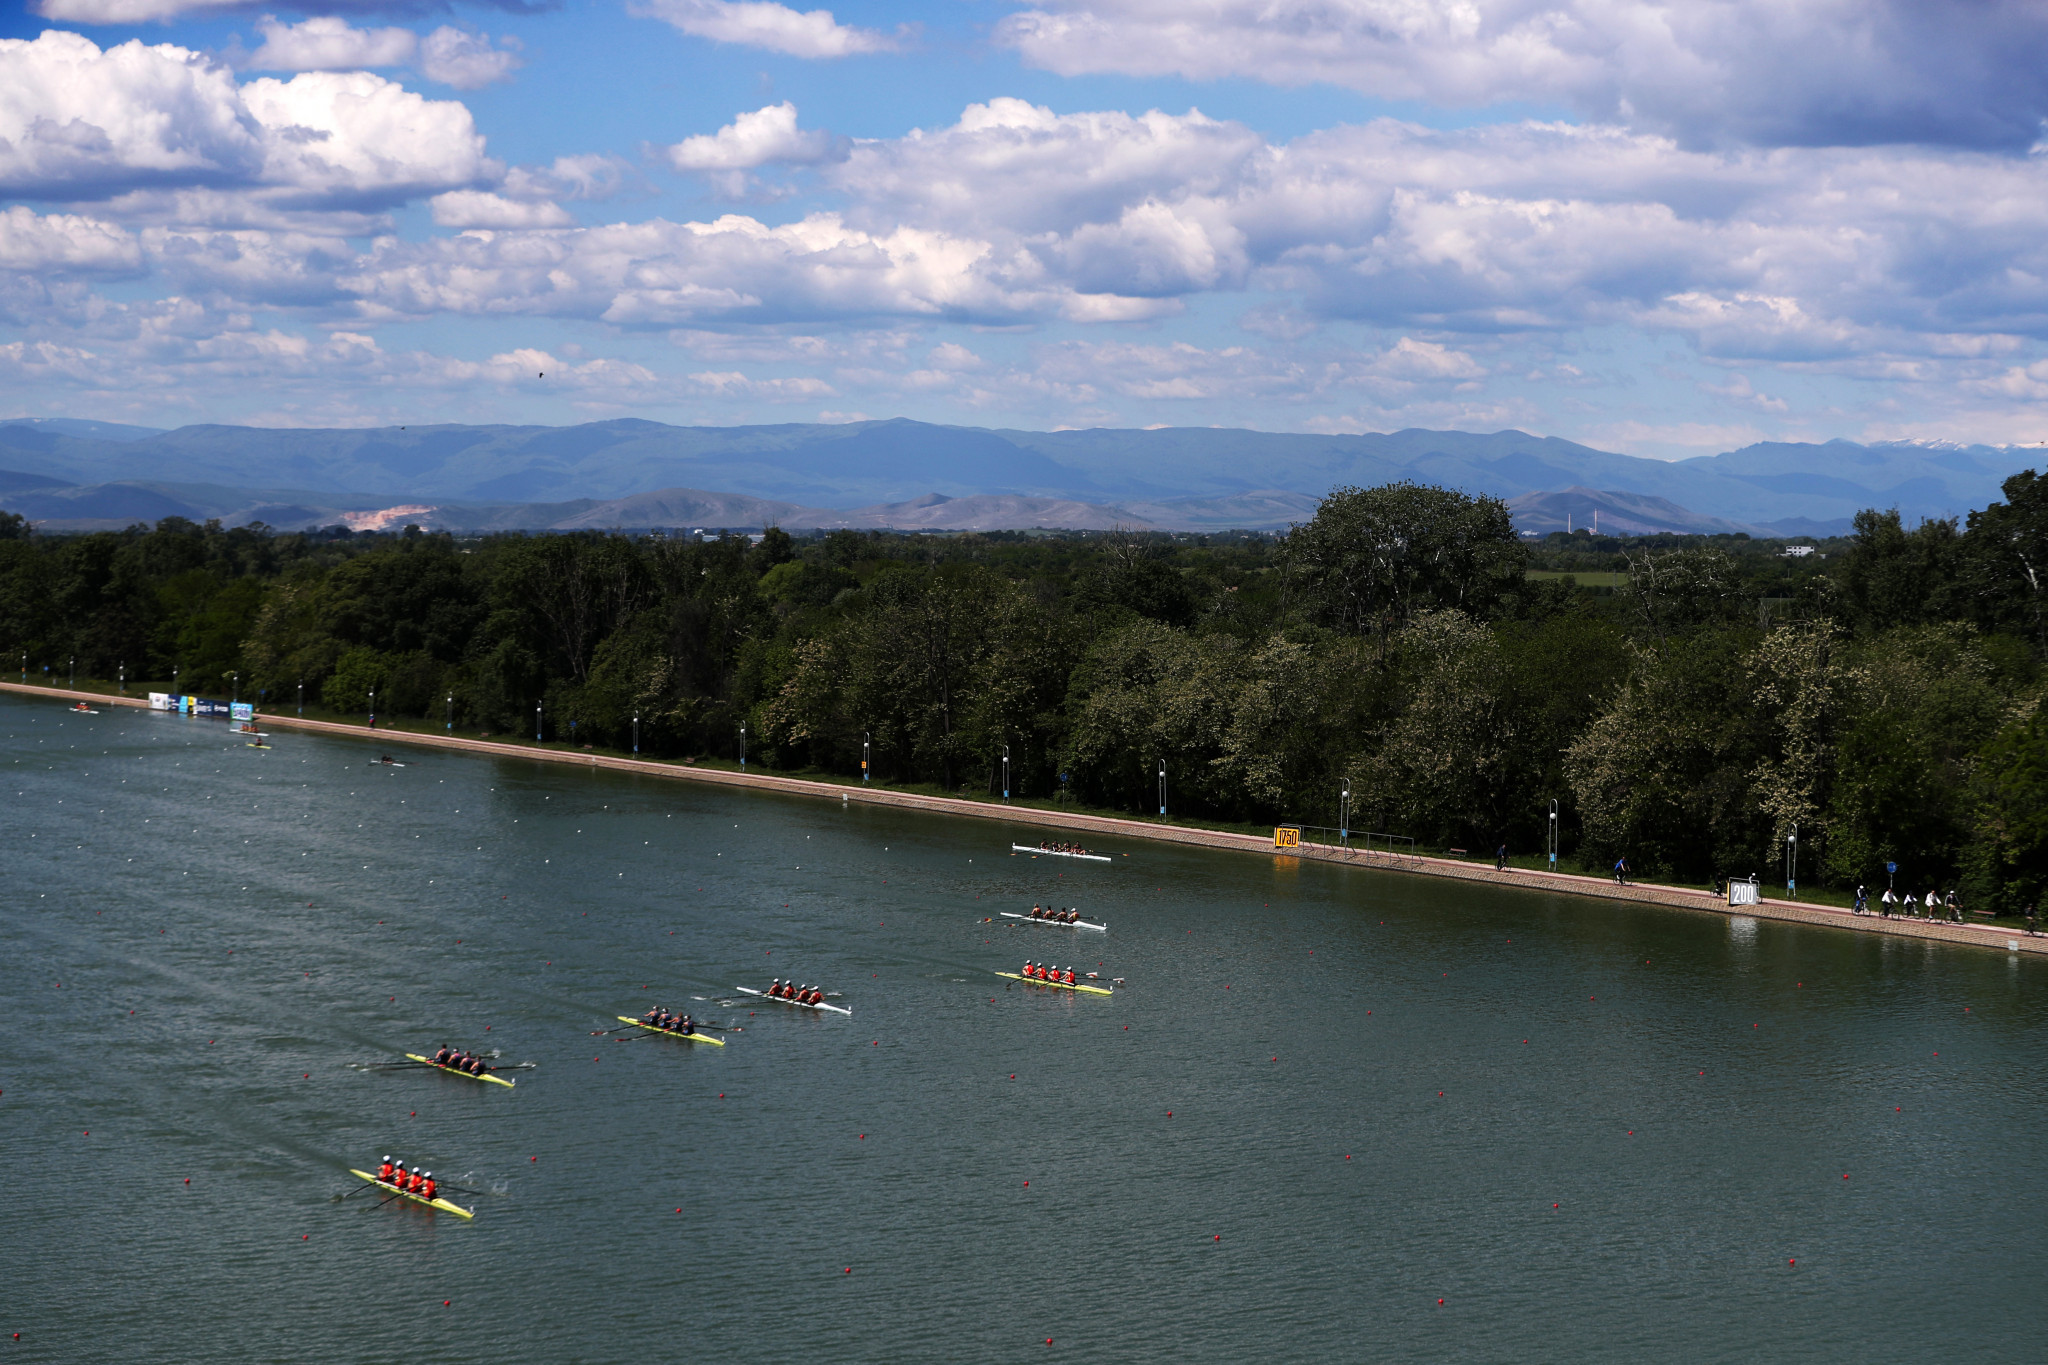 Final line-ups decided at World Rowing junior Championships